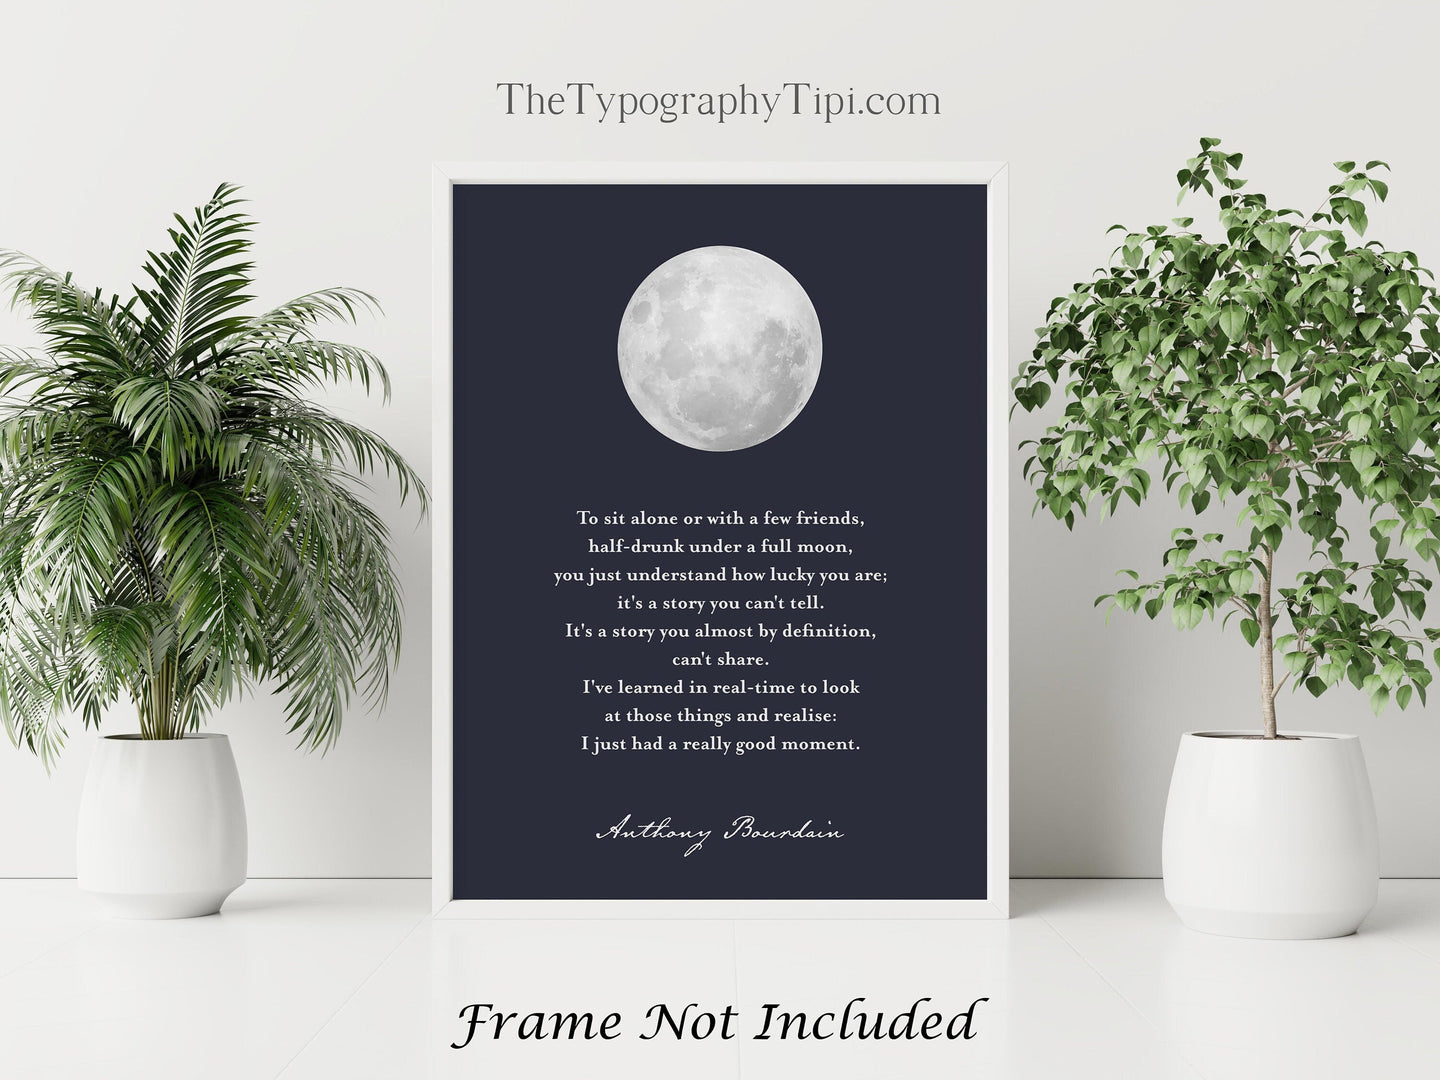 Anthony Bourdain Quote - To sit alone or with a few friends, half-drunk under a full moon - Physical Print Without Frame